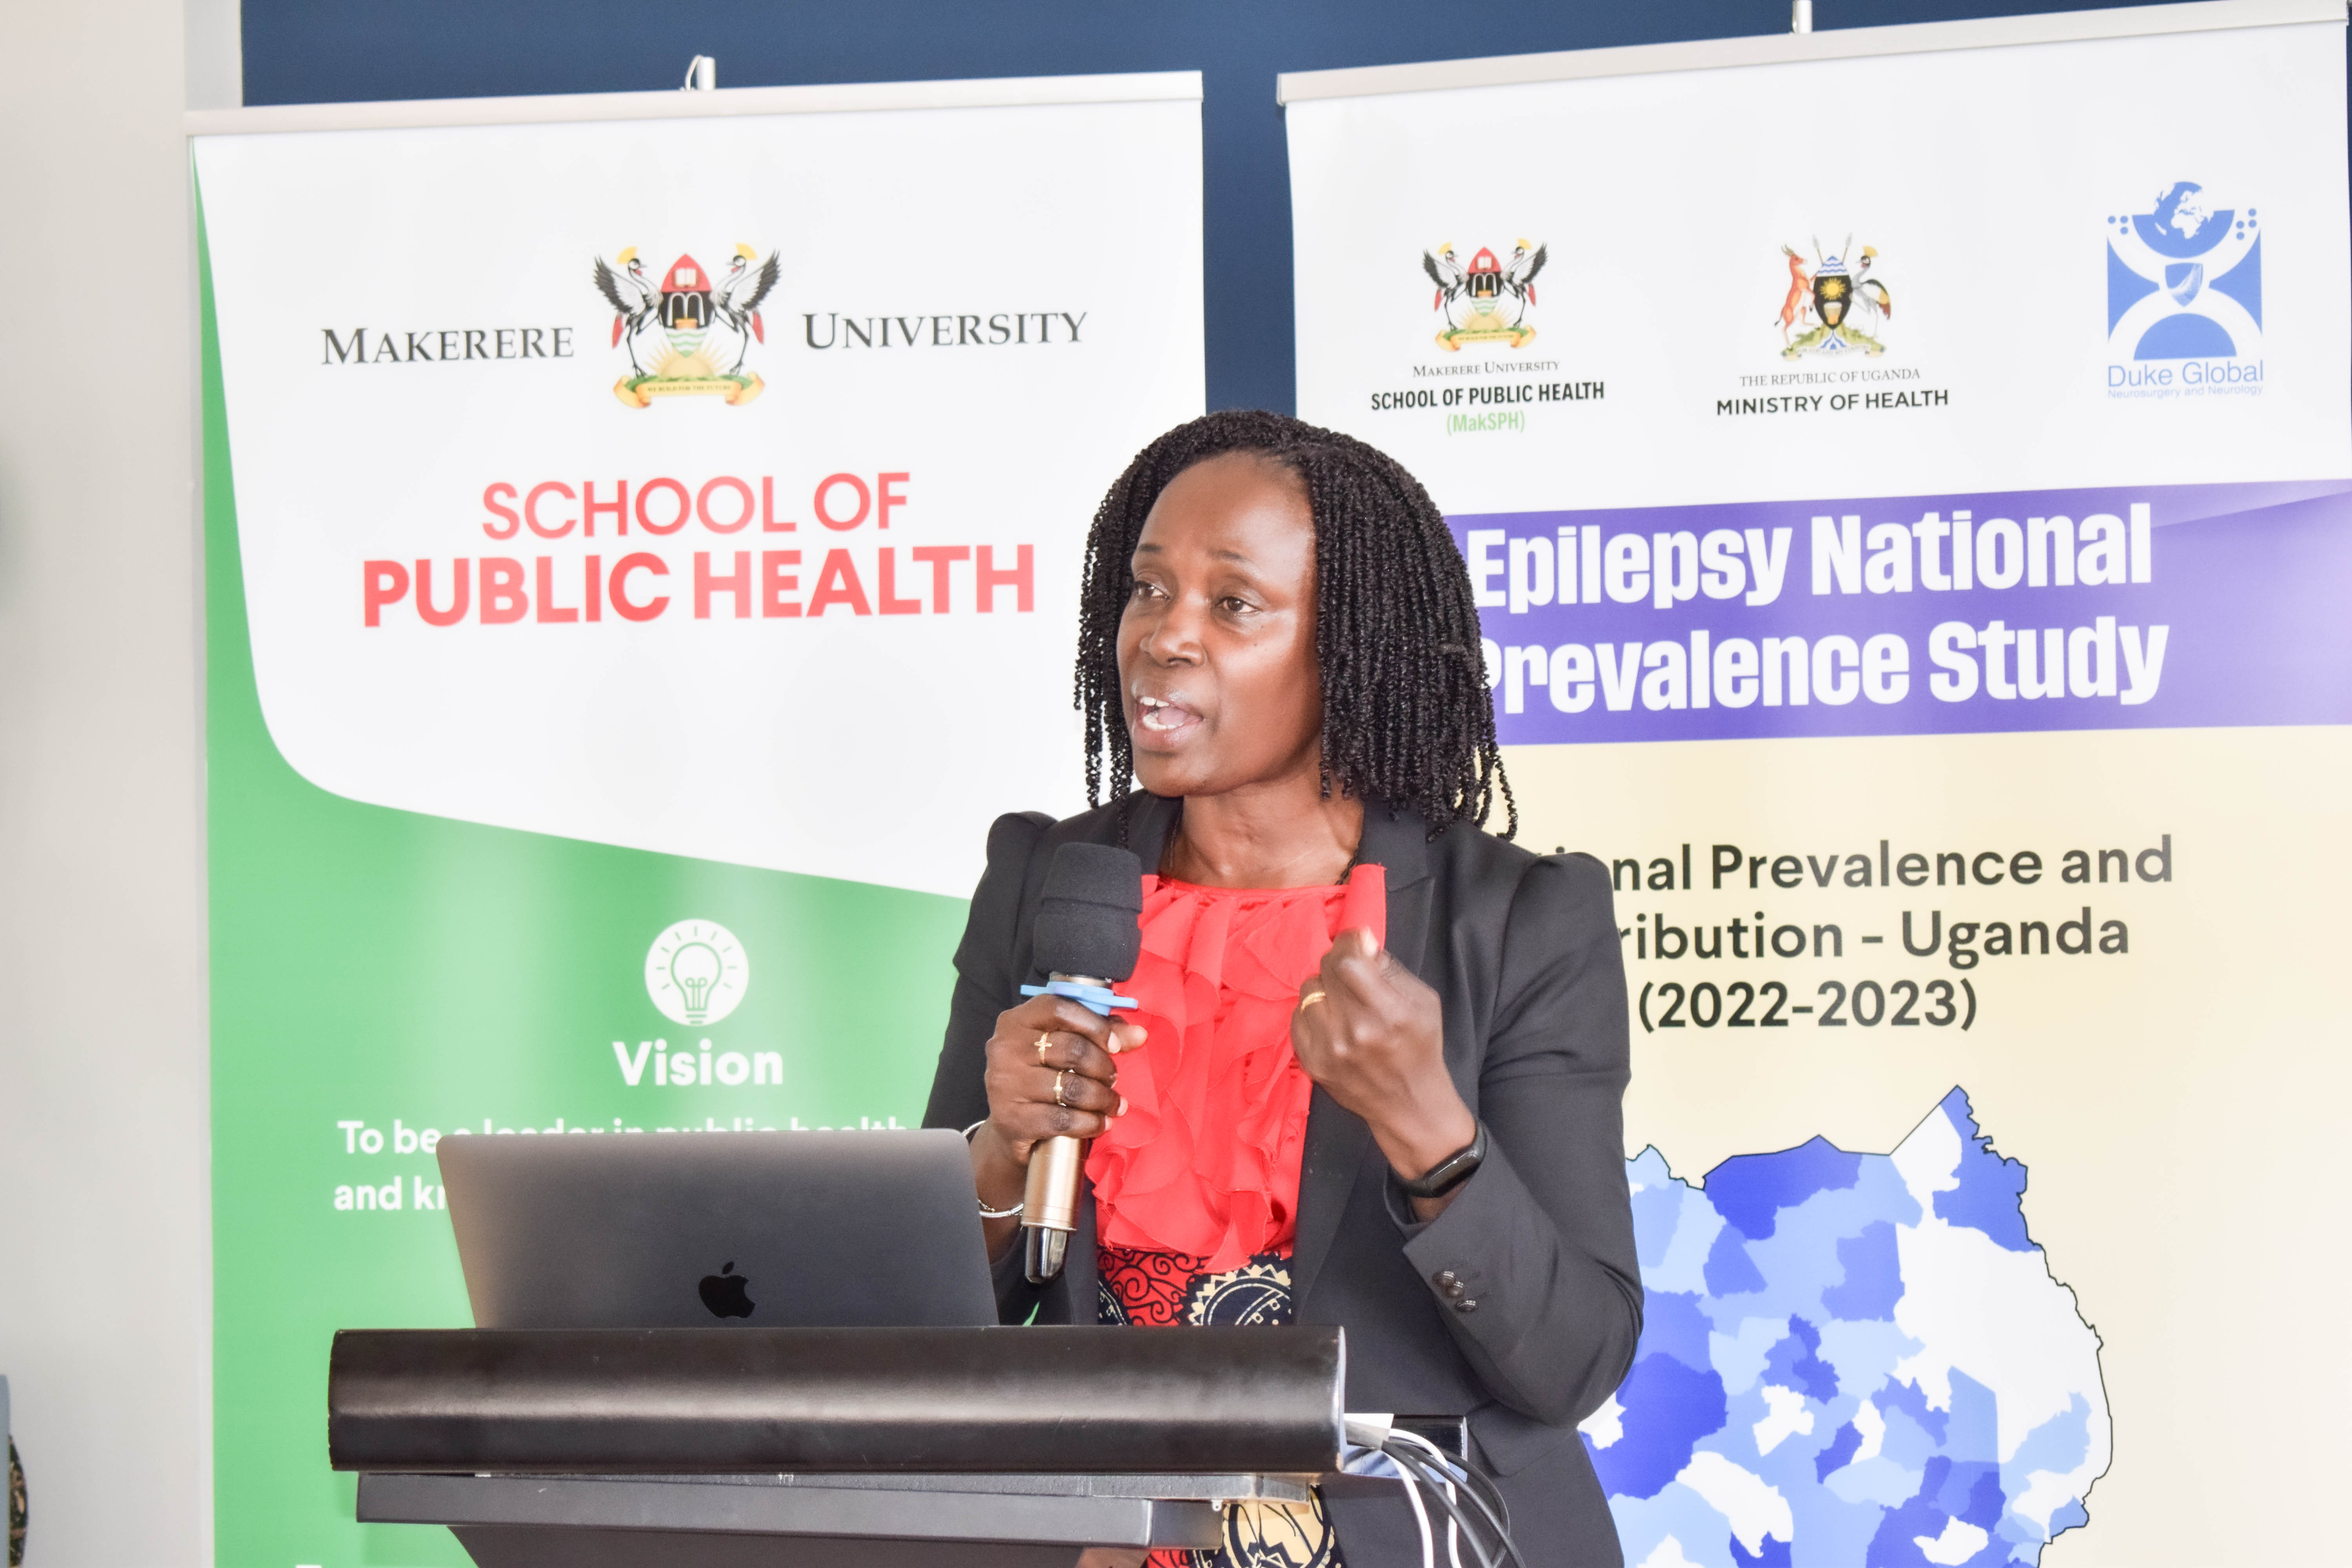 Dr. Angelina Kakooza Mwesige, a Co-Principal Investigator for Uganda who is also a Senior Lecturer and Paediatric Neurologist in the Department of Paediatrics and Child Health, Makerere University School of Medicin